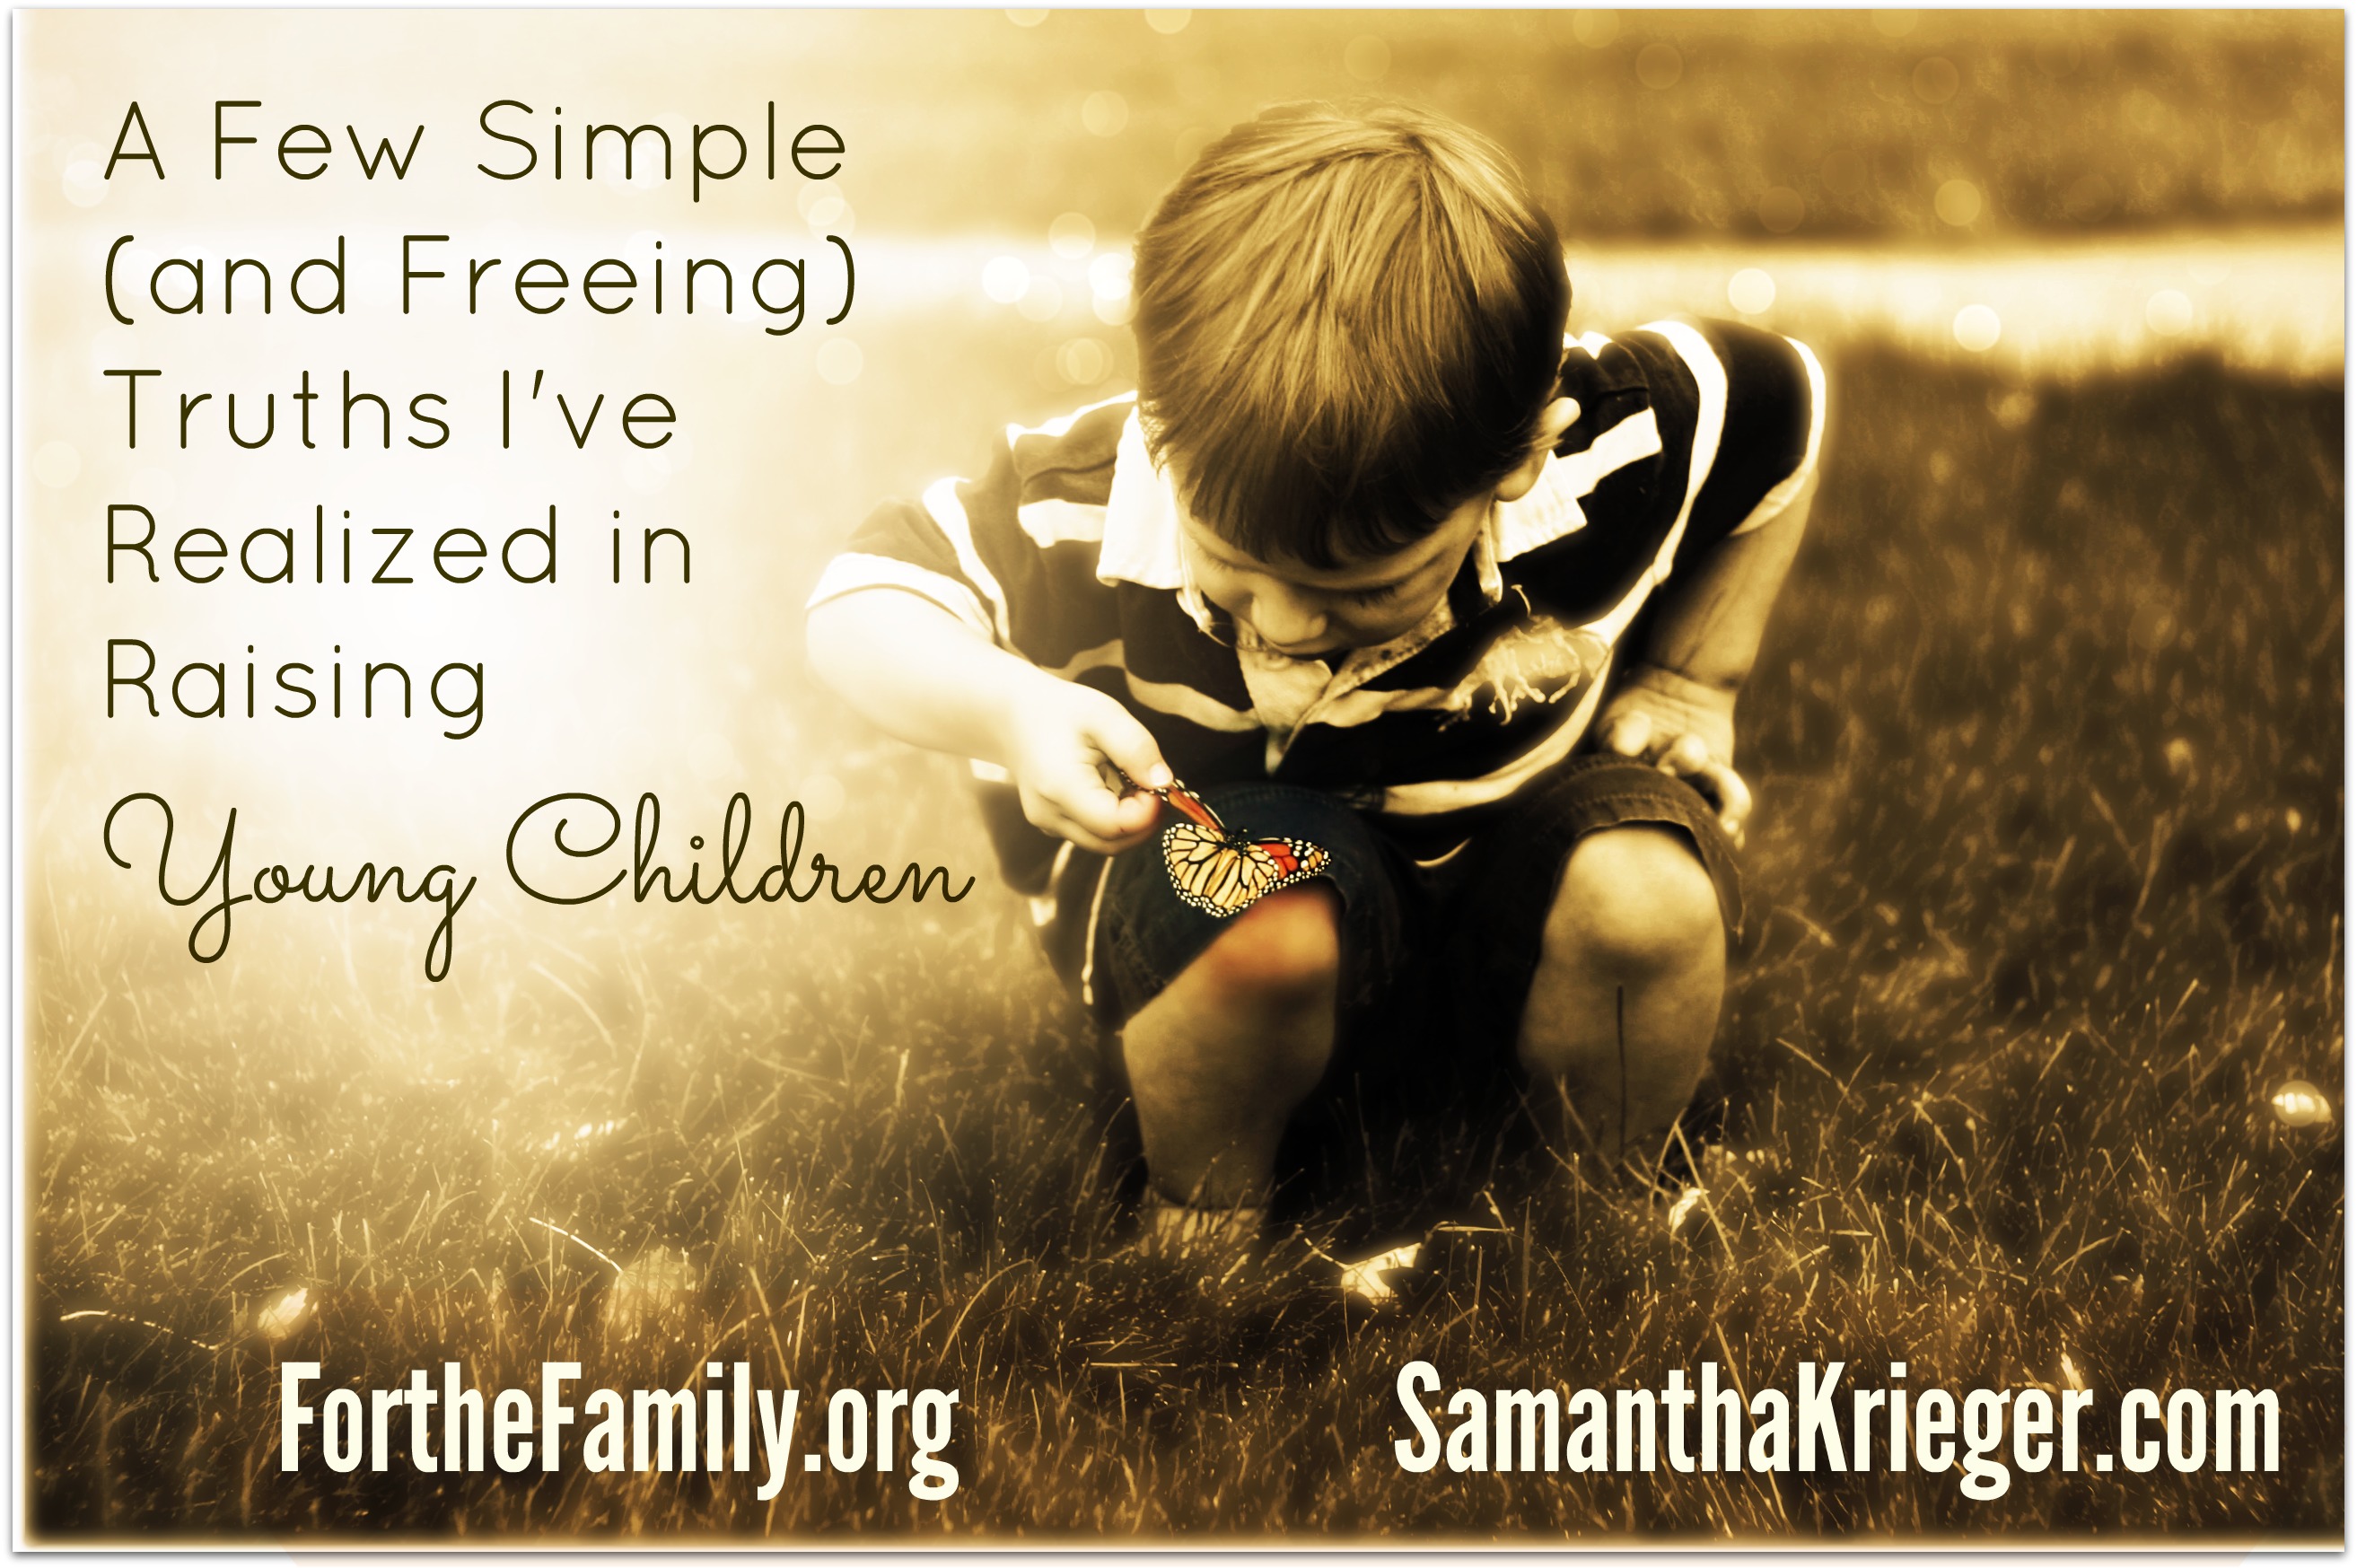 A Few Simple (and Freeing) Truths I’ve Realized in Raising Young Children